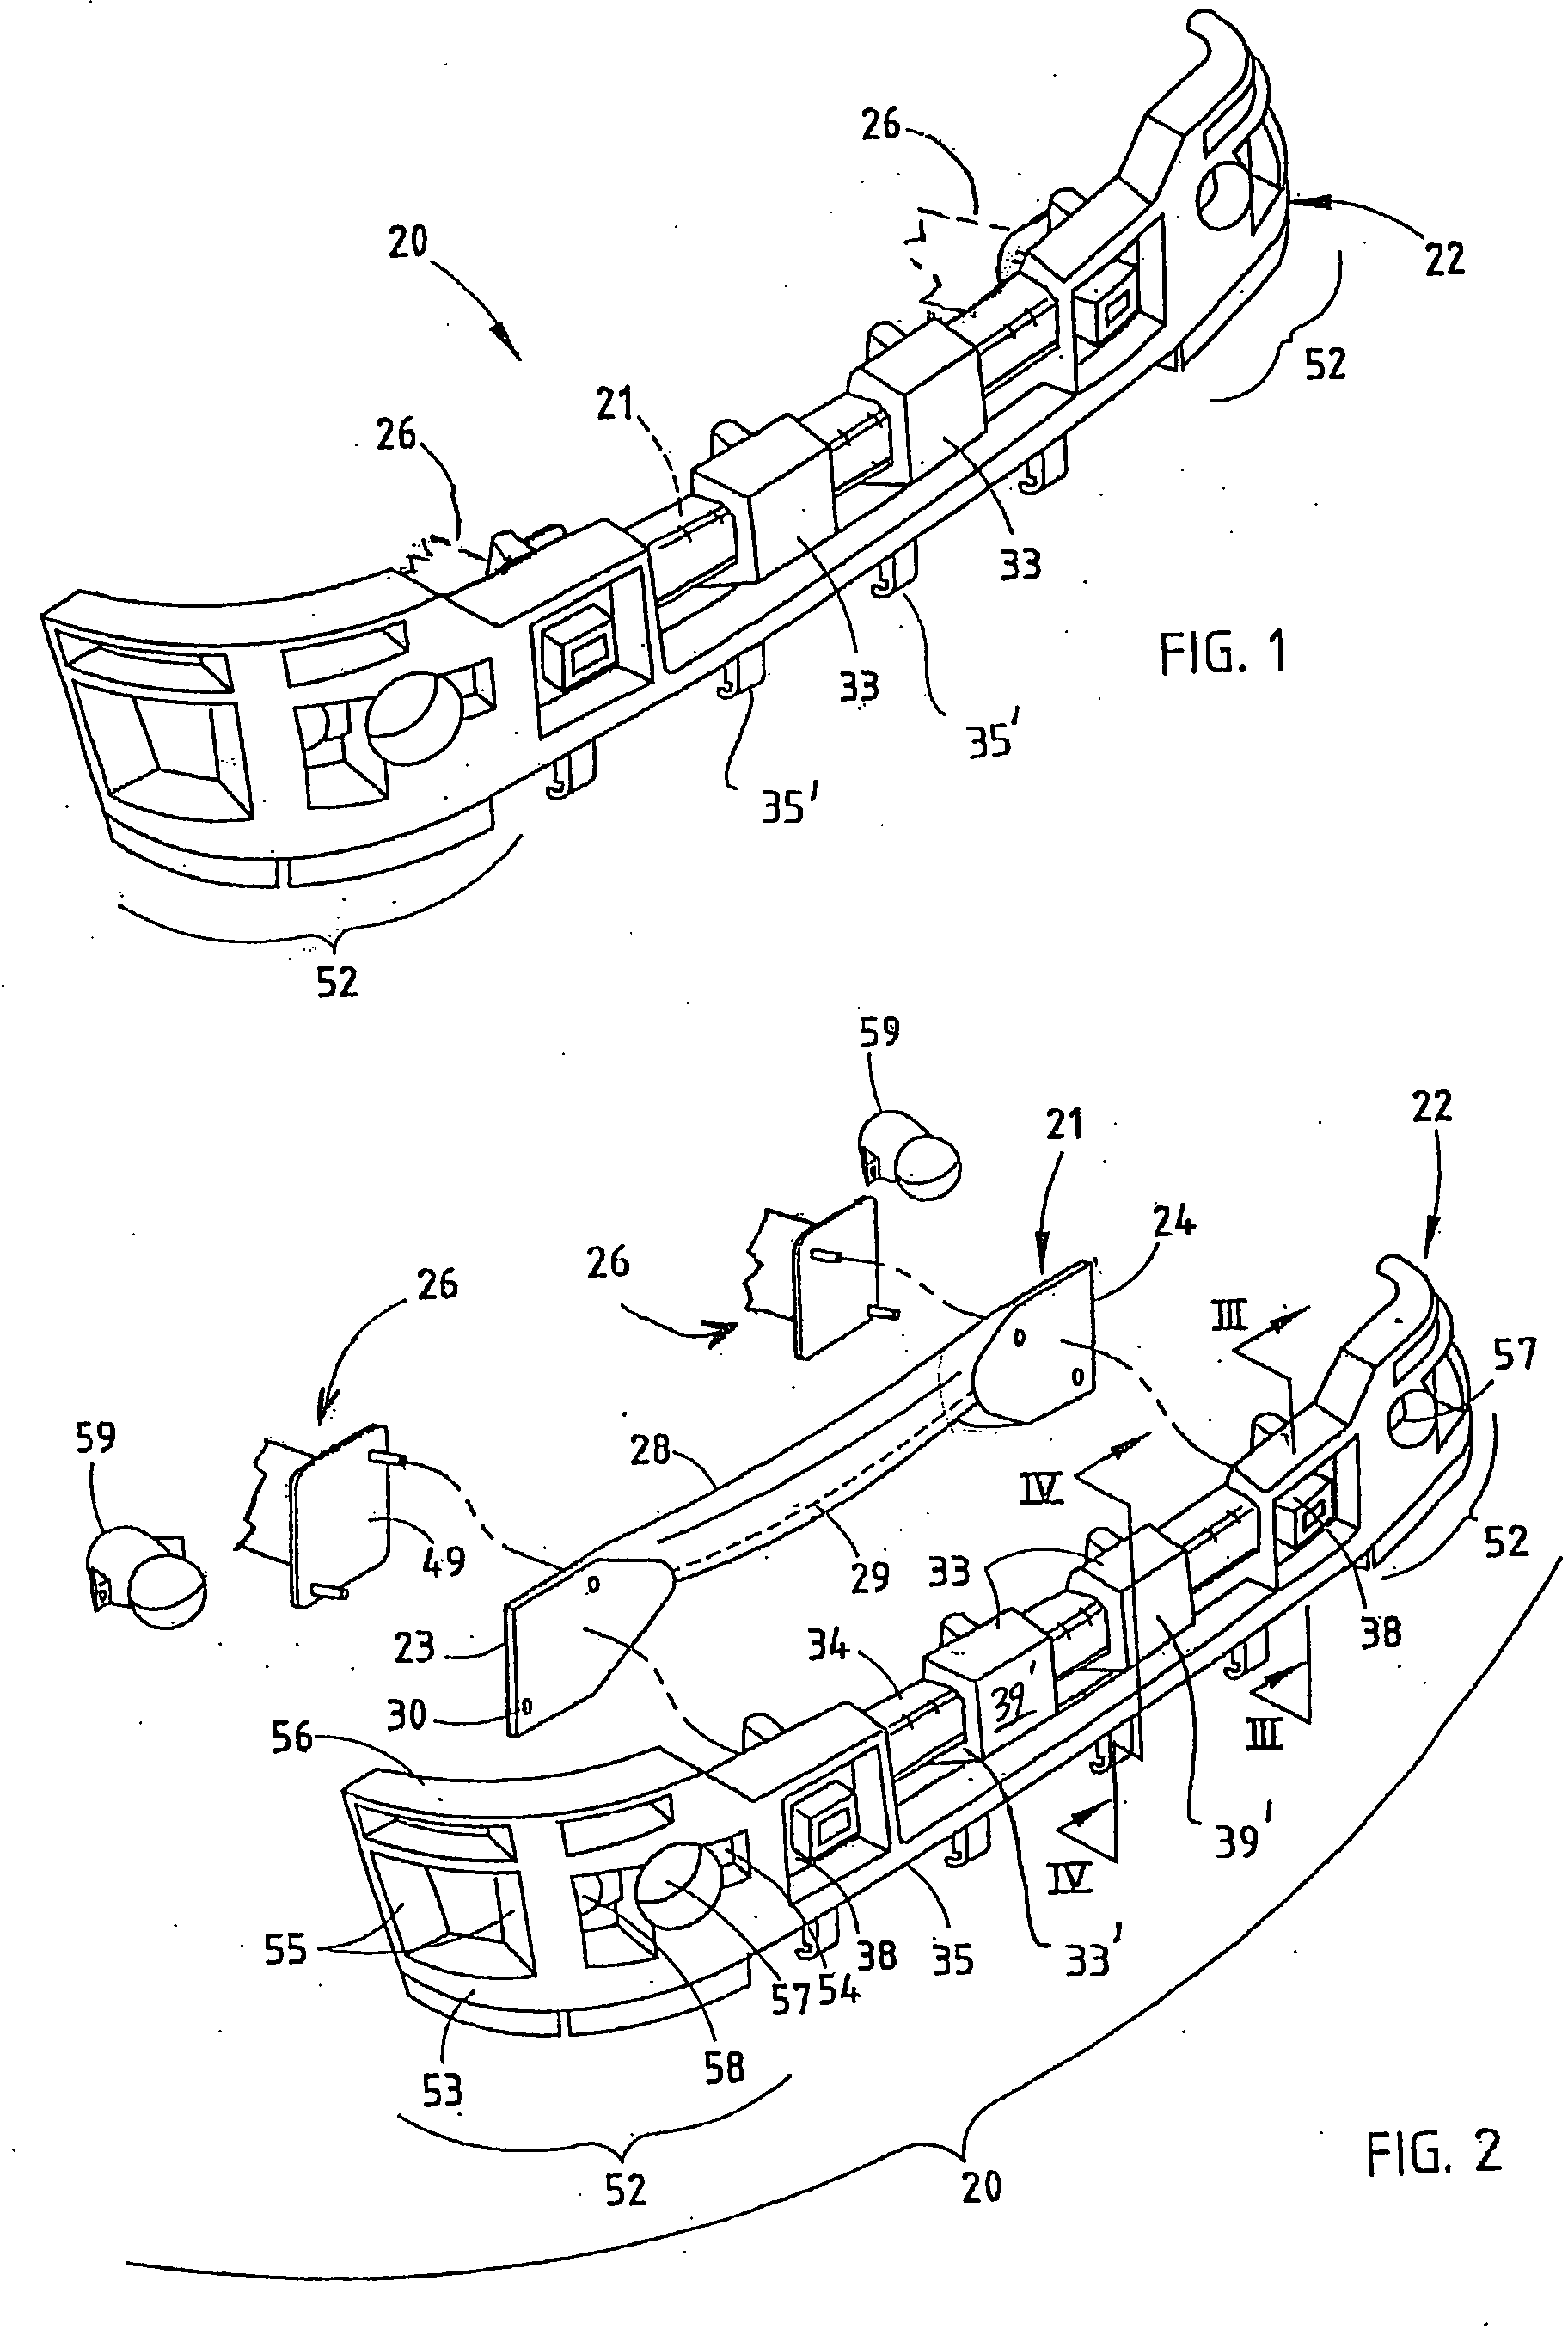 Bumper with integrally formed energy absorber